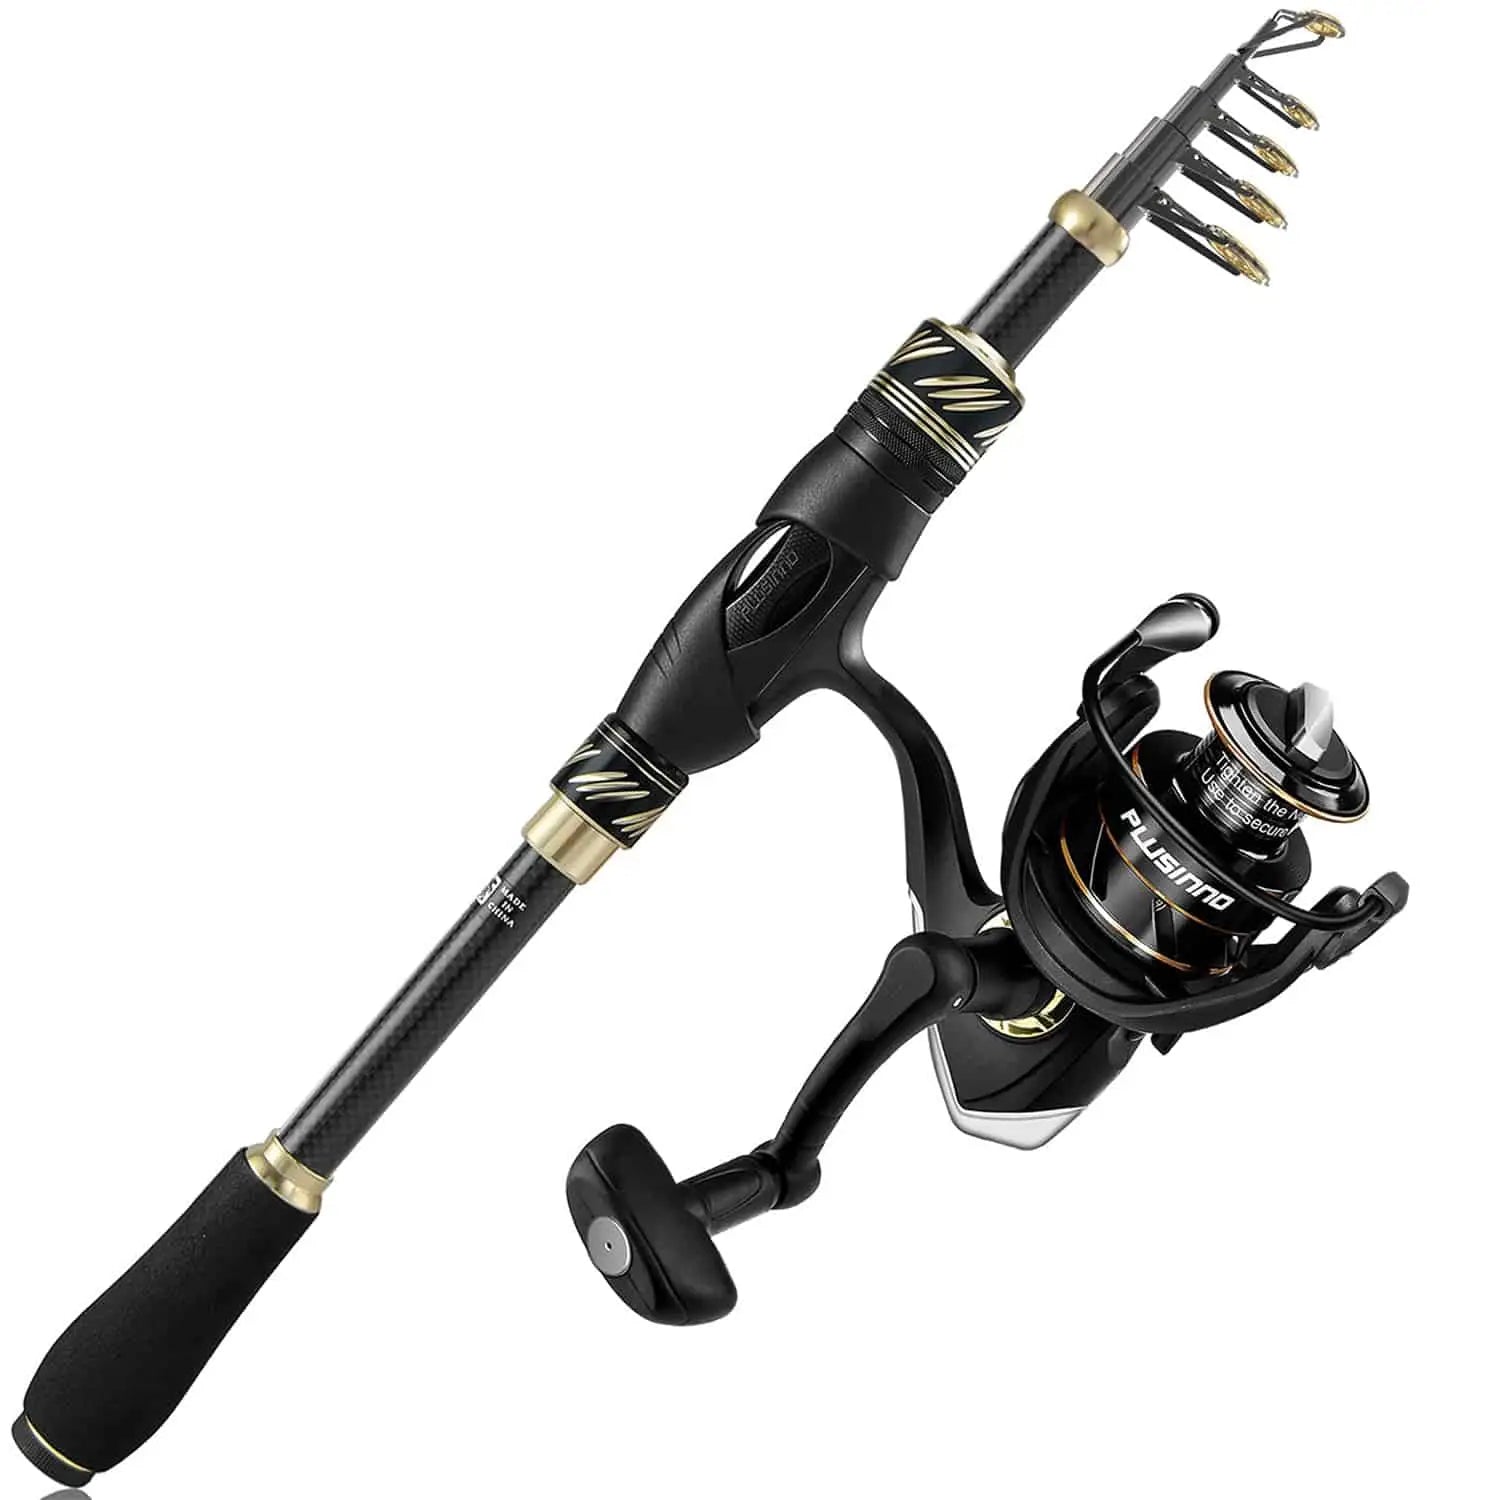 PLUSINNO Fishing Rod and Reel Combo, Ultralight Carbon Fiber Telescopic Fishing  Pole with EVA Handle, Left / Right Hand Anti-Reverse Spinning Reel, Best  Gifts for Man Fishing Beginner and Angler : 